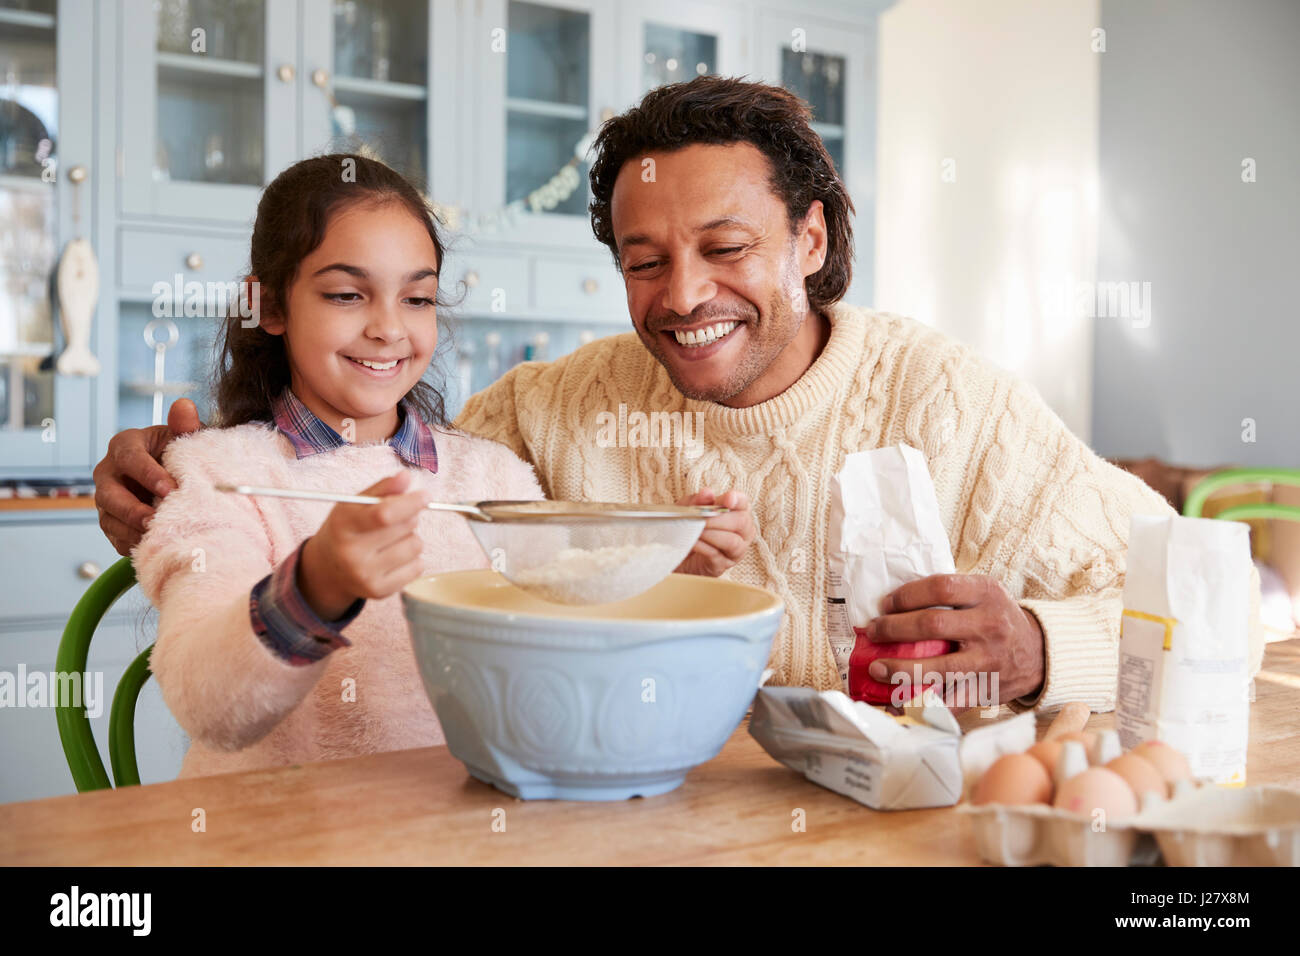 Father And Daughter Baking Cookies At Home Together Stock Photo